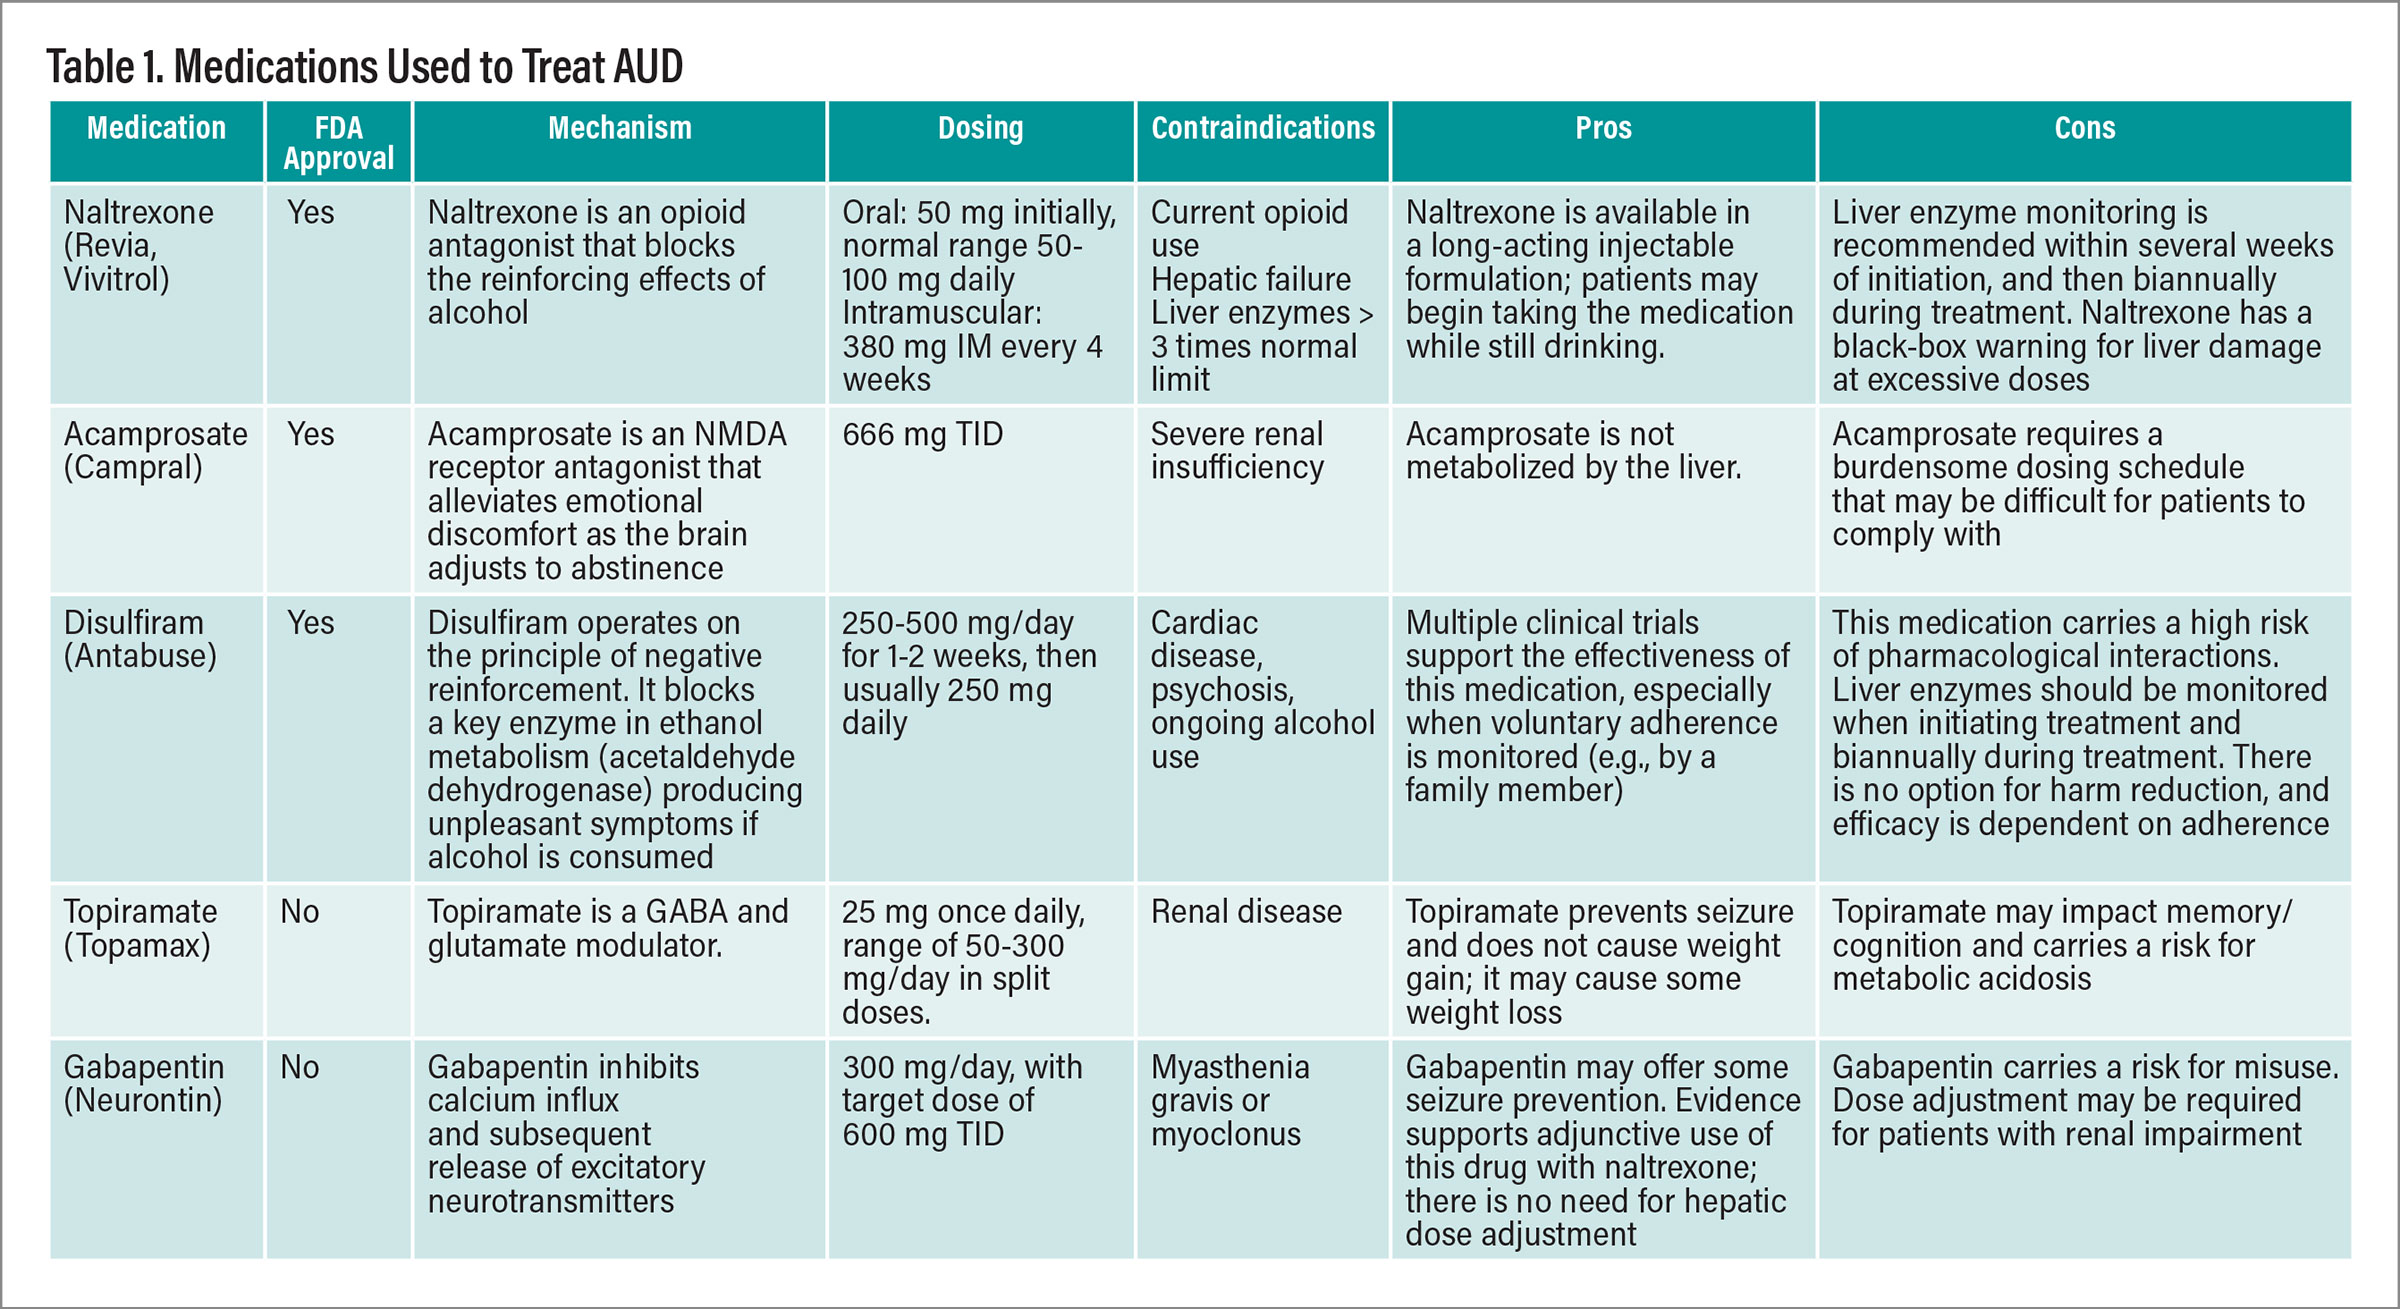 Table showing Medications Used to Treat AUD